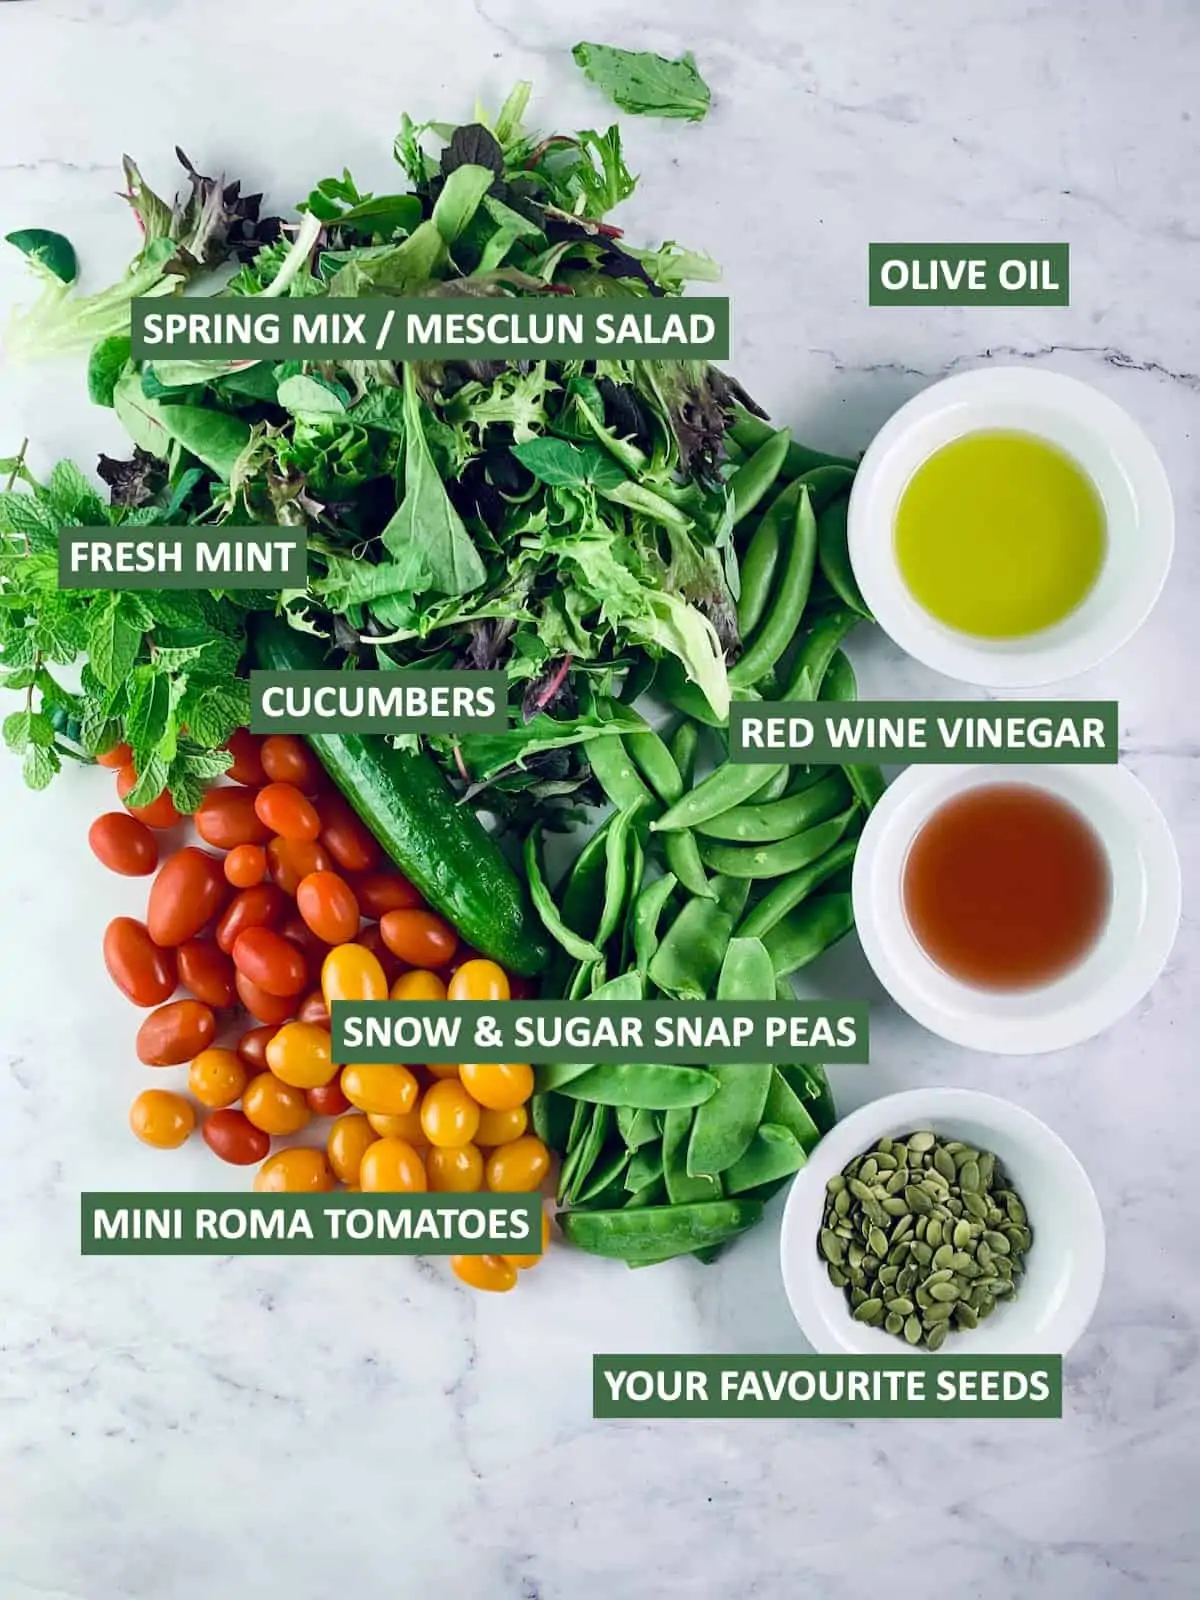 Labelled ingredients needed to make Spring Mix Salad.